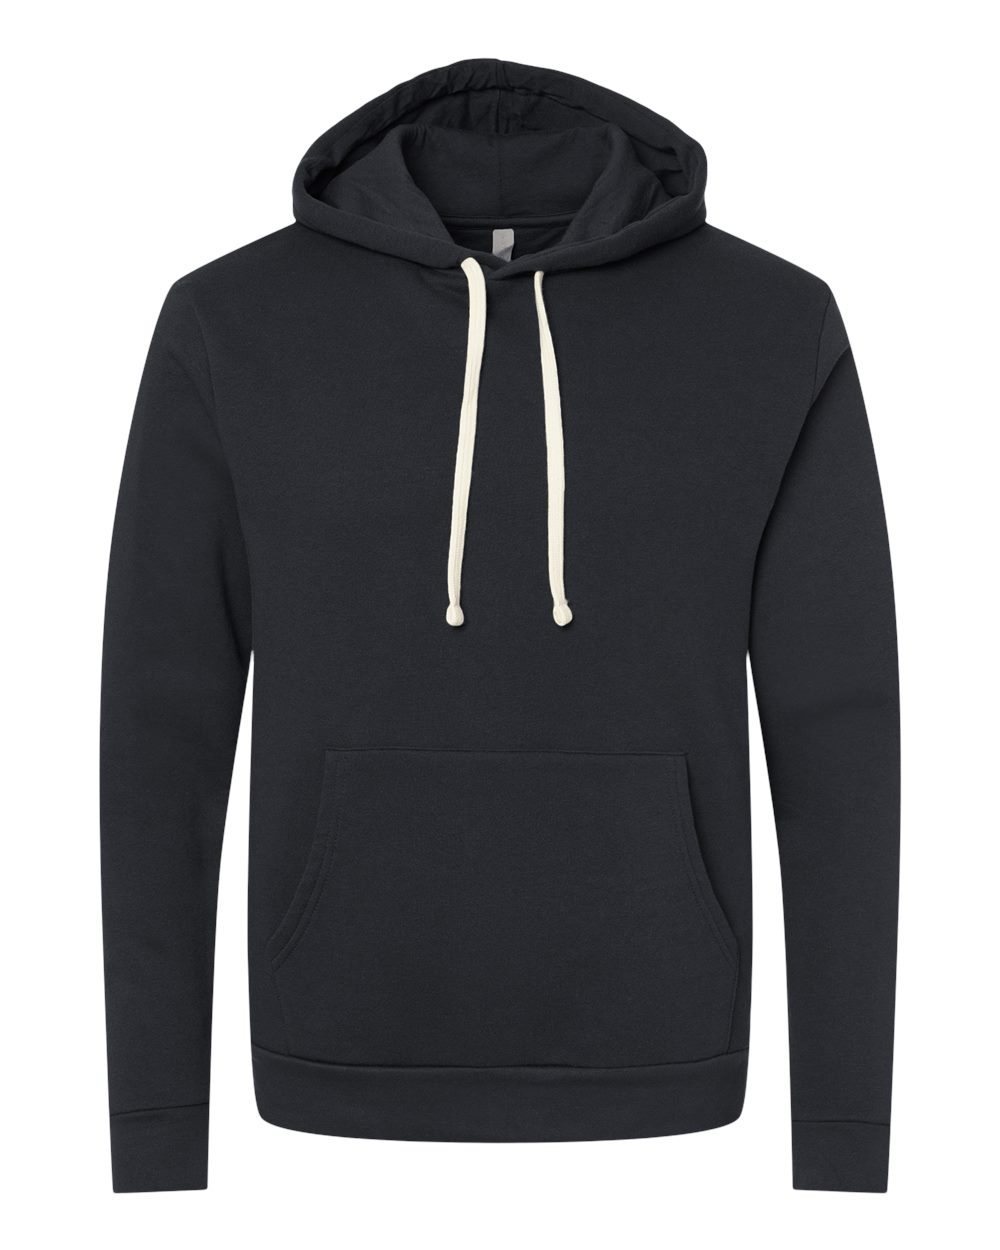 Why do hoodies get less soft?